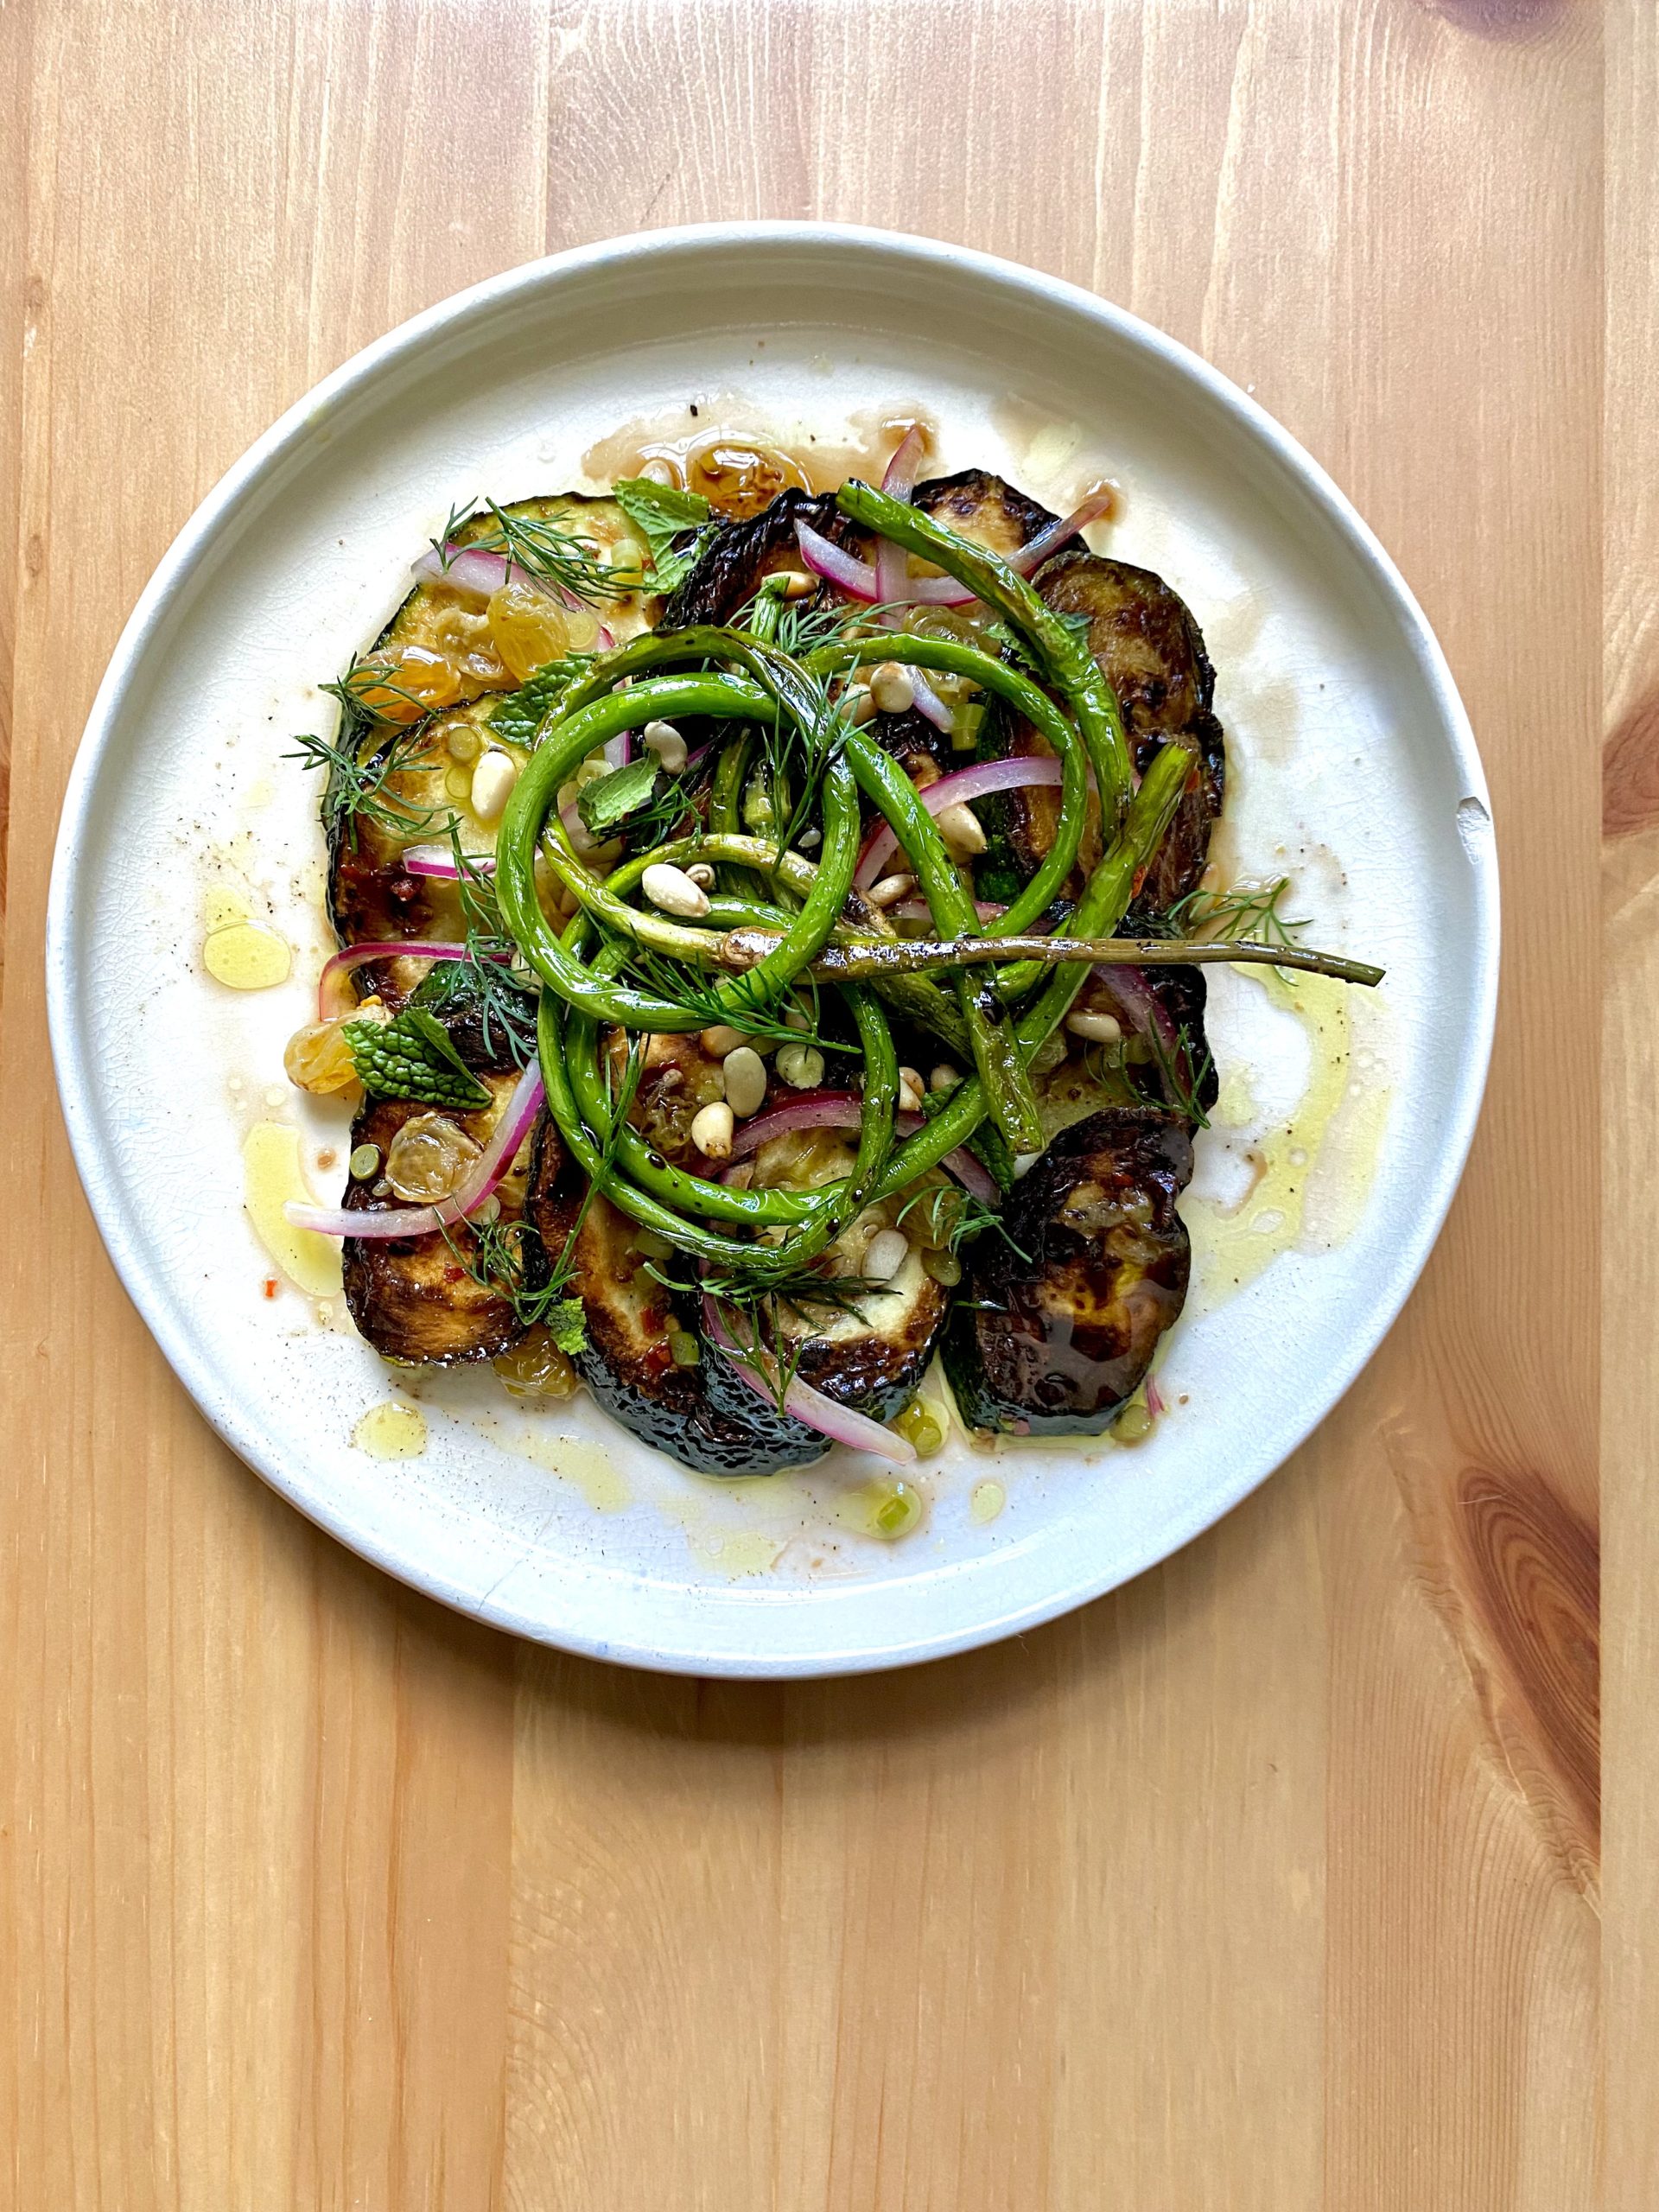 A plate with a zucchini appetizer, including onions, spices, herbs, and garlic scapes.